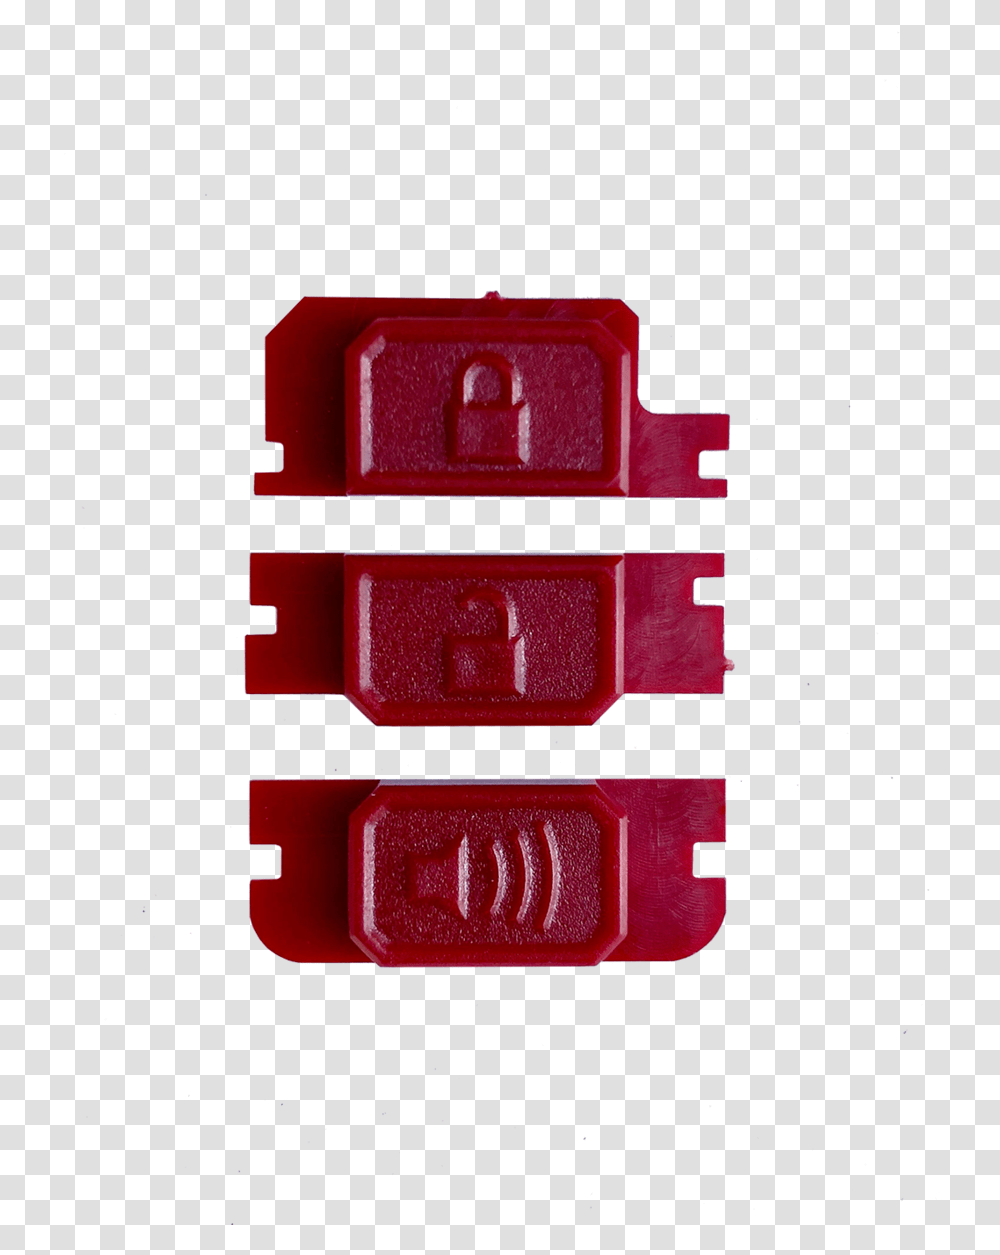 Minimalist Fob Buttons Red Plastic, Electrical Device, Text, Switch, PEZ Dispenser Transparent Png